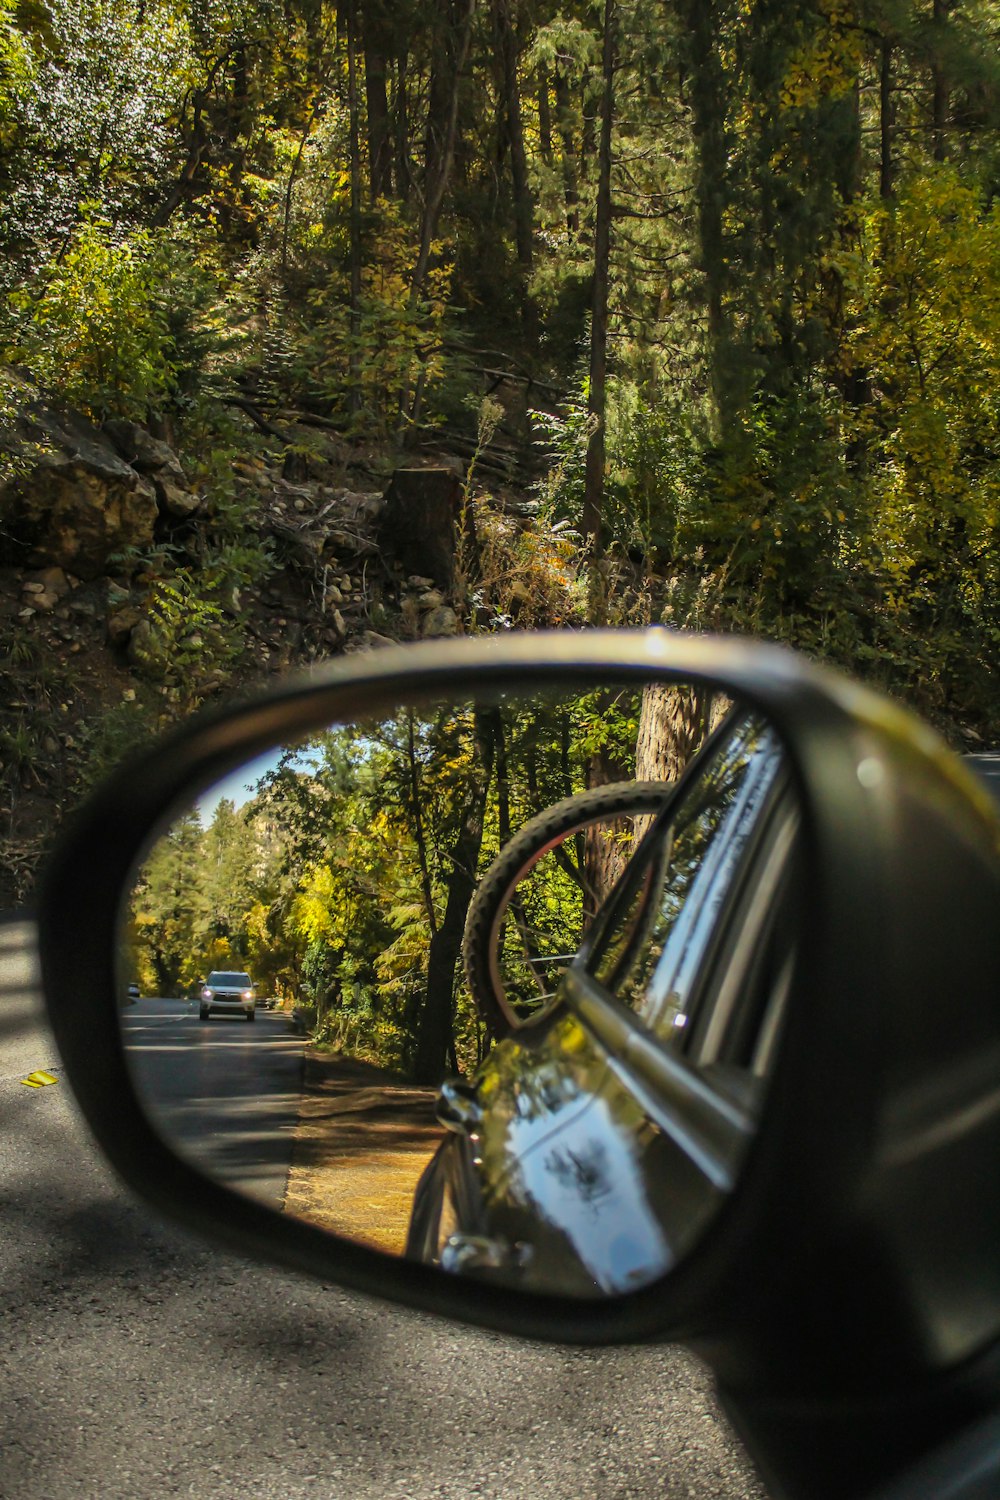 reflection of car and trees on vehicle wing mirror